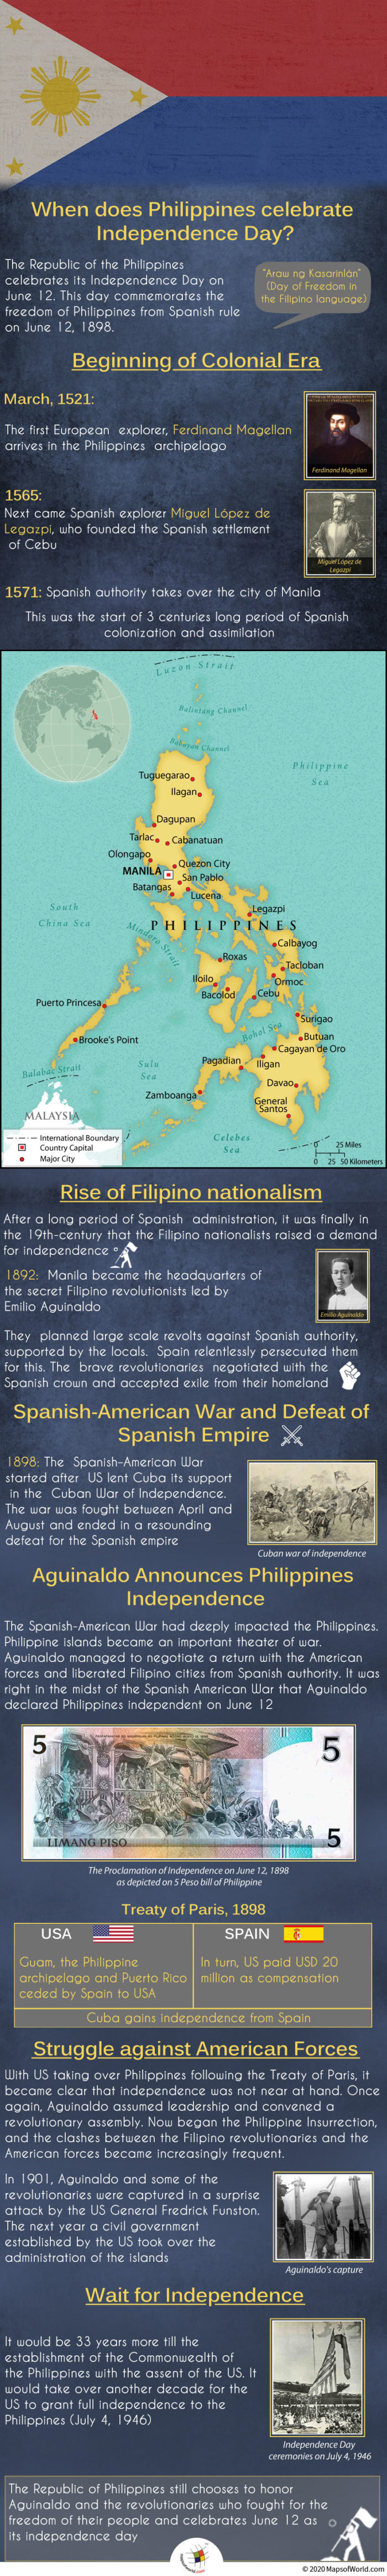 Infographic - When Does Philippines Celebrate Independence Day?